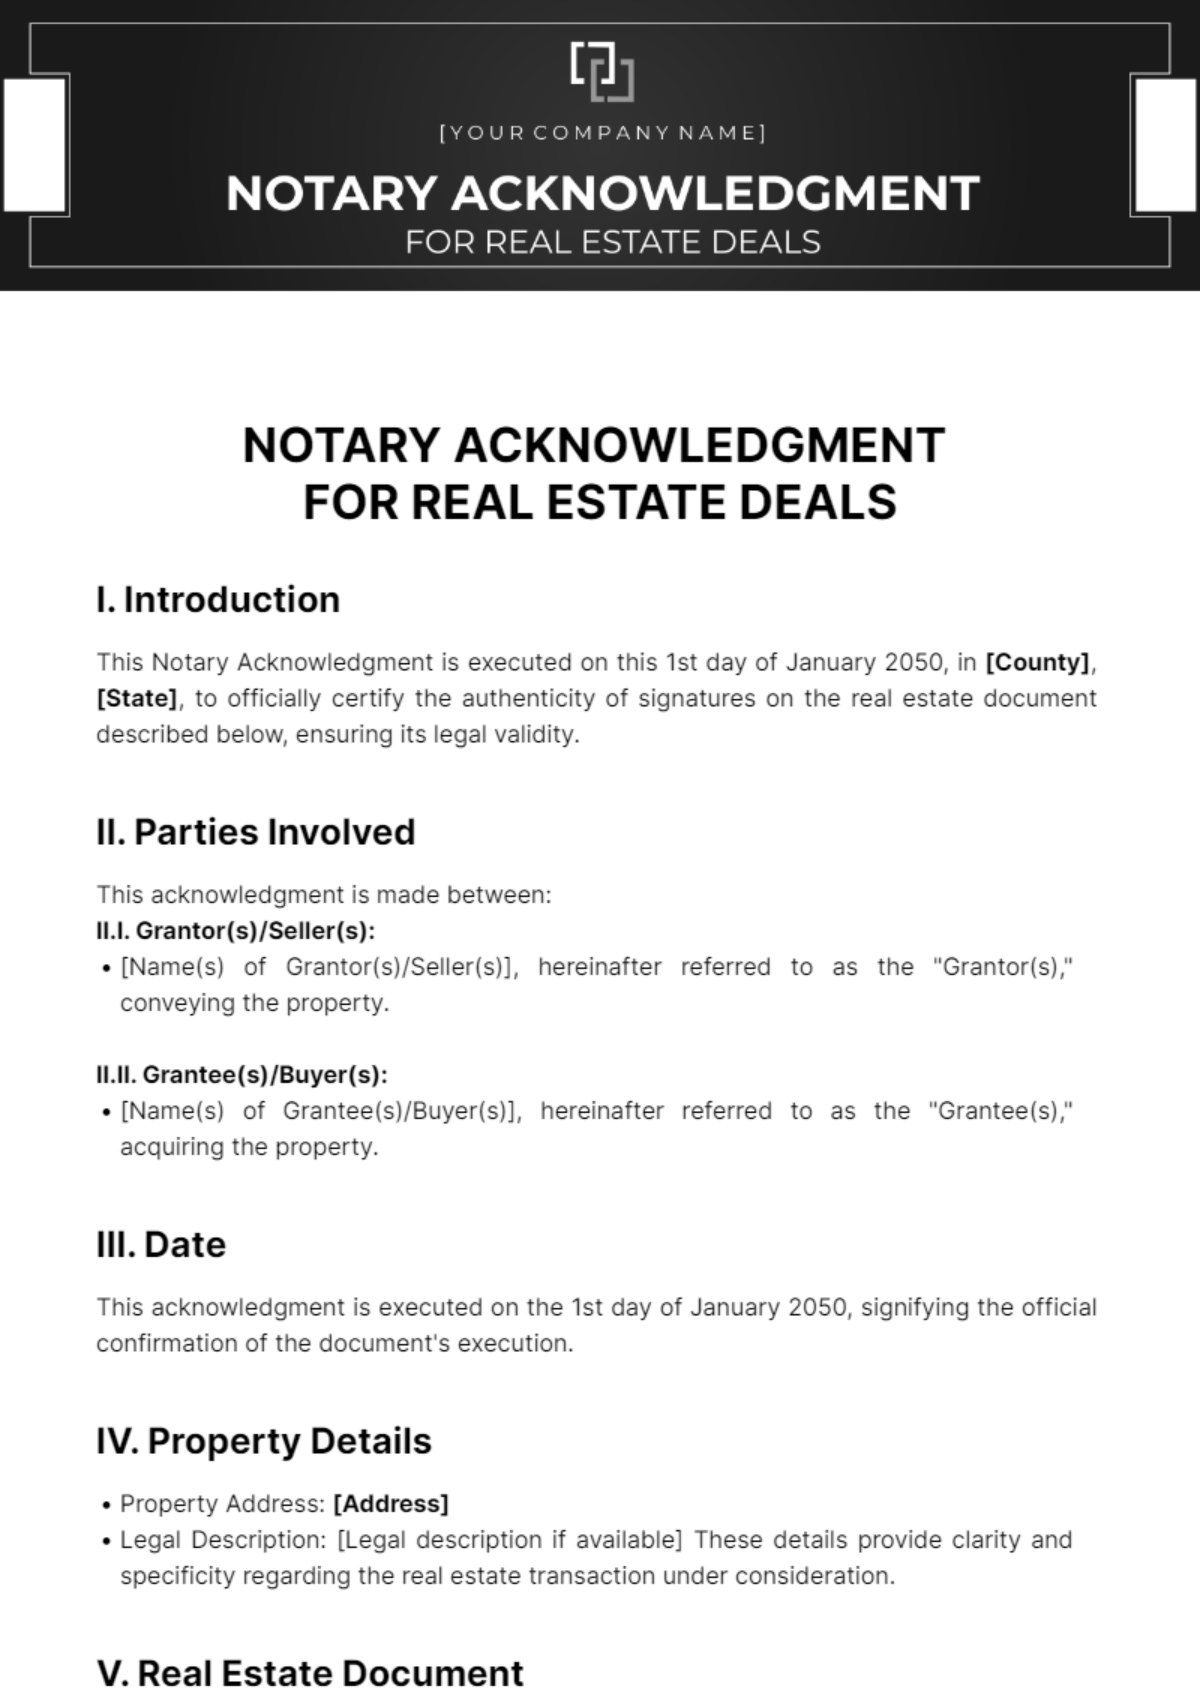 Free Notary Acknowledgment For Real Estate Deals Template